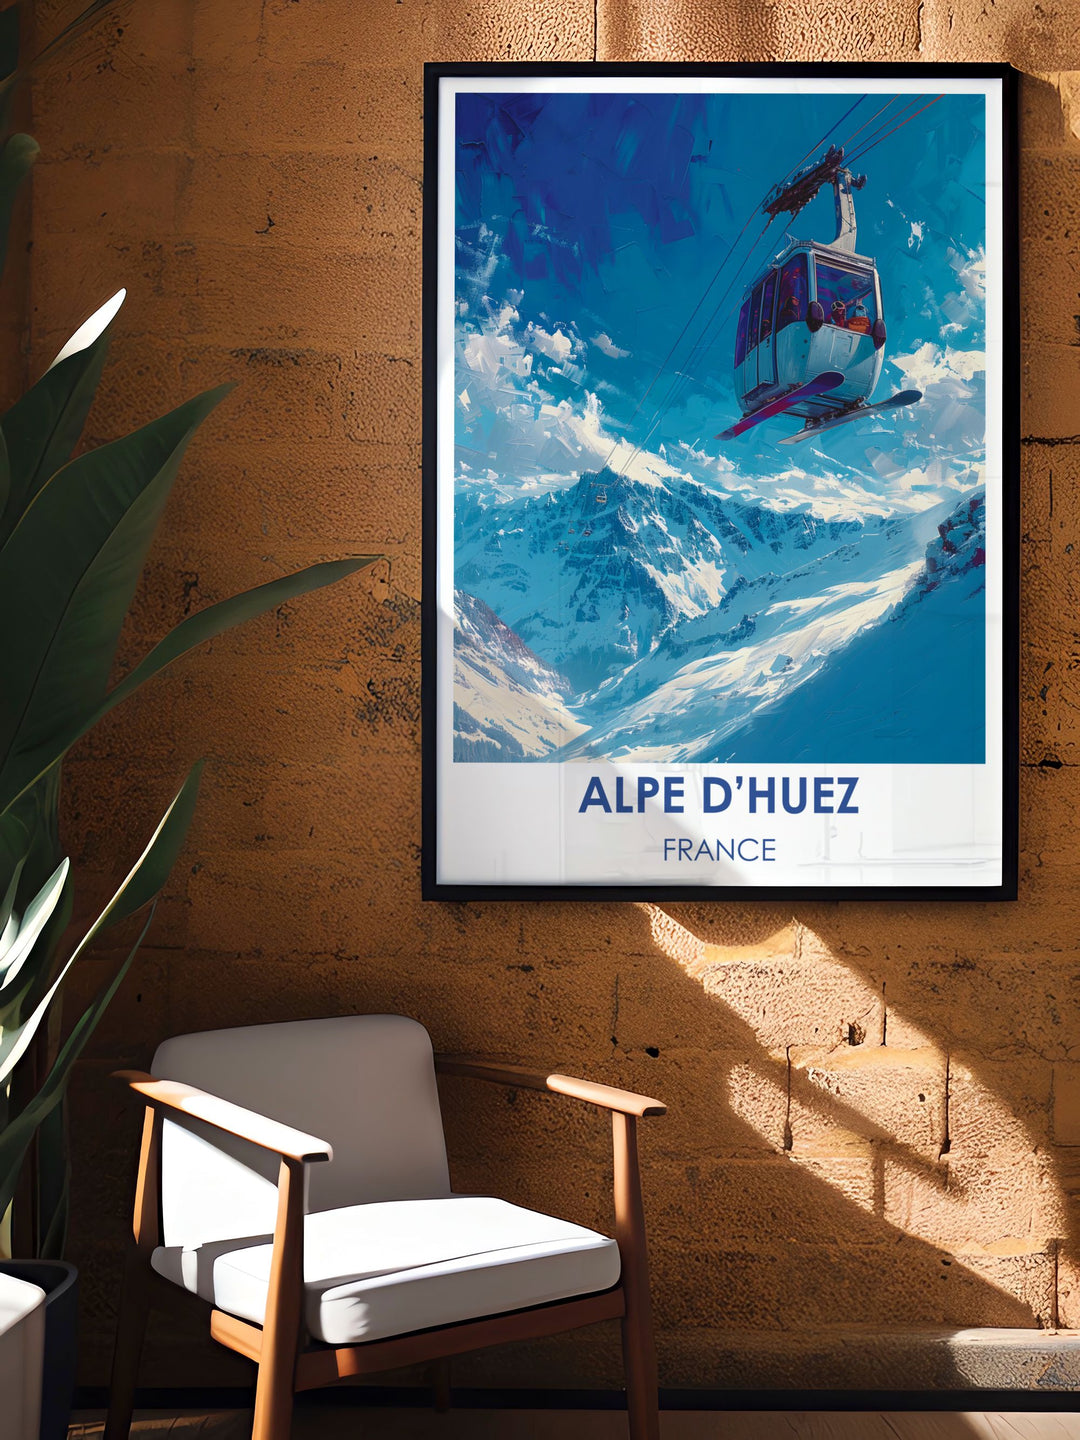 Detailed print of a winter scene in Alpe dHuez, capturing the tranquil beauty of snow covered slopes and ski action.